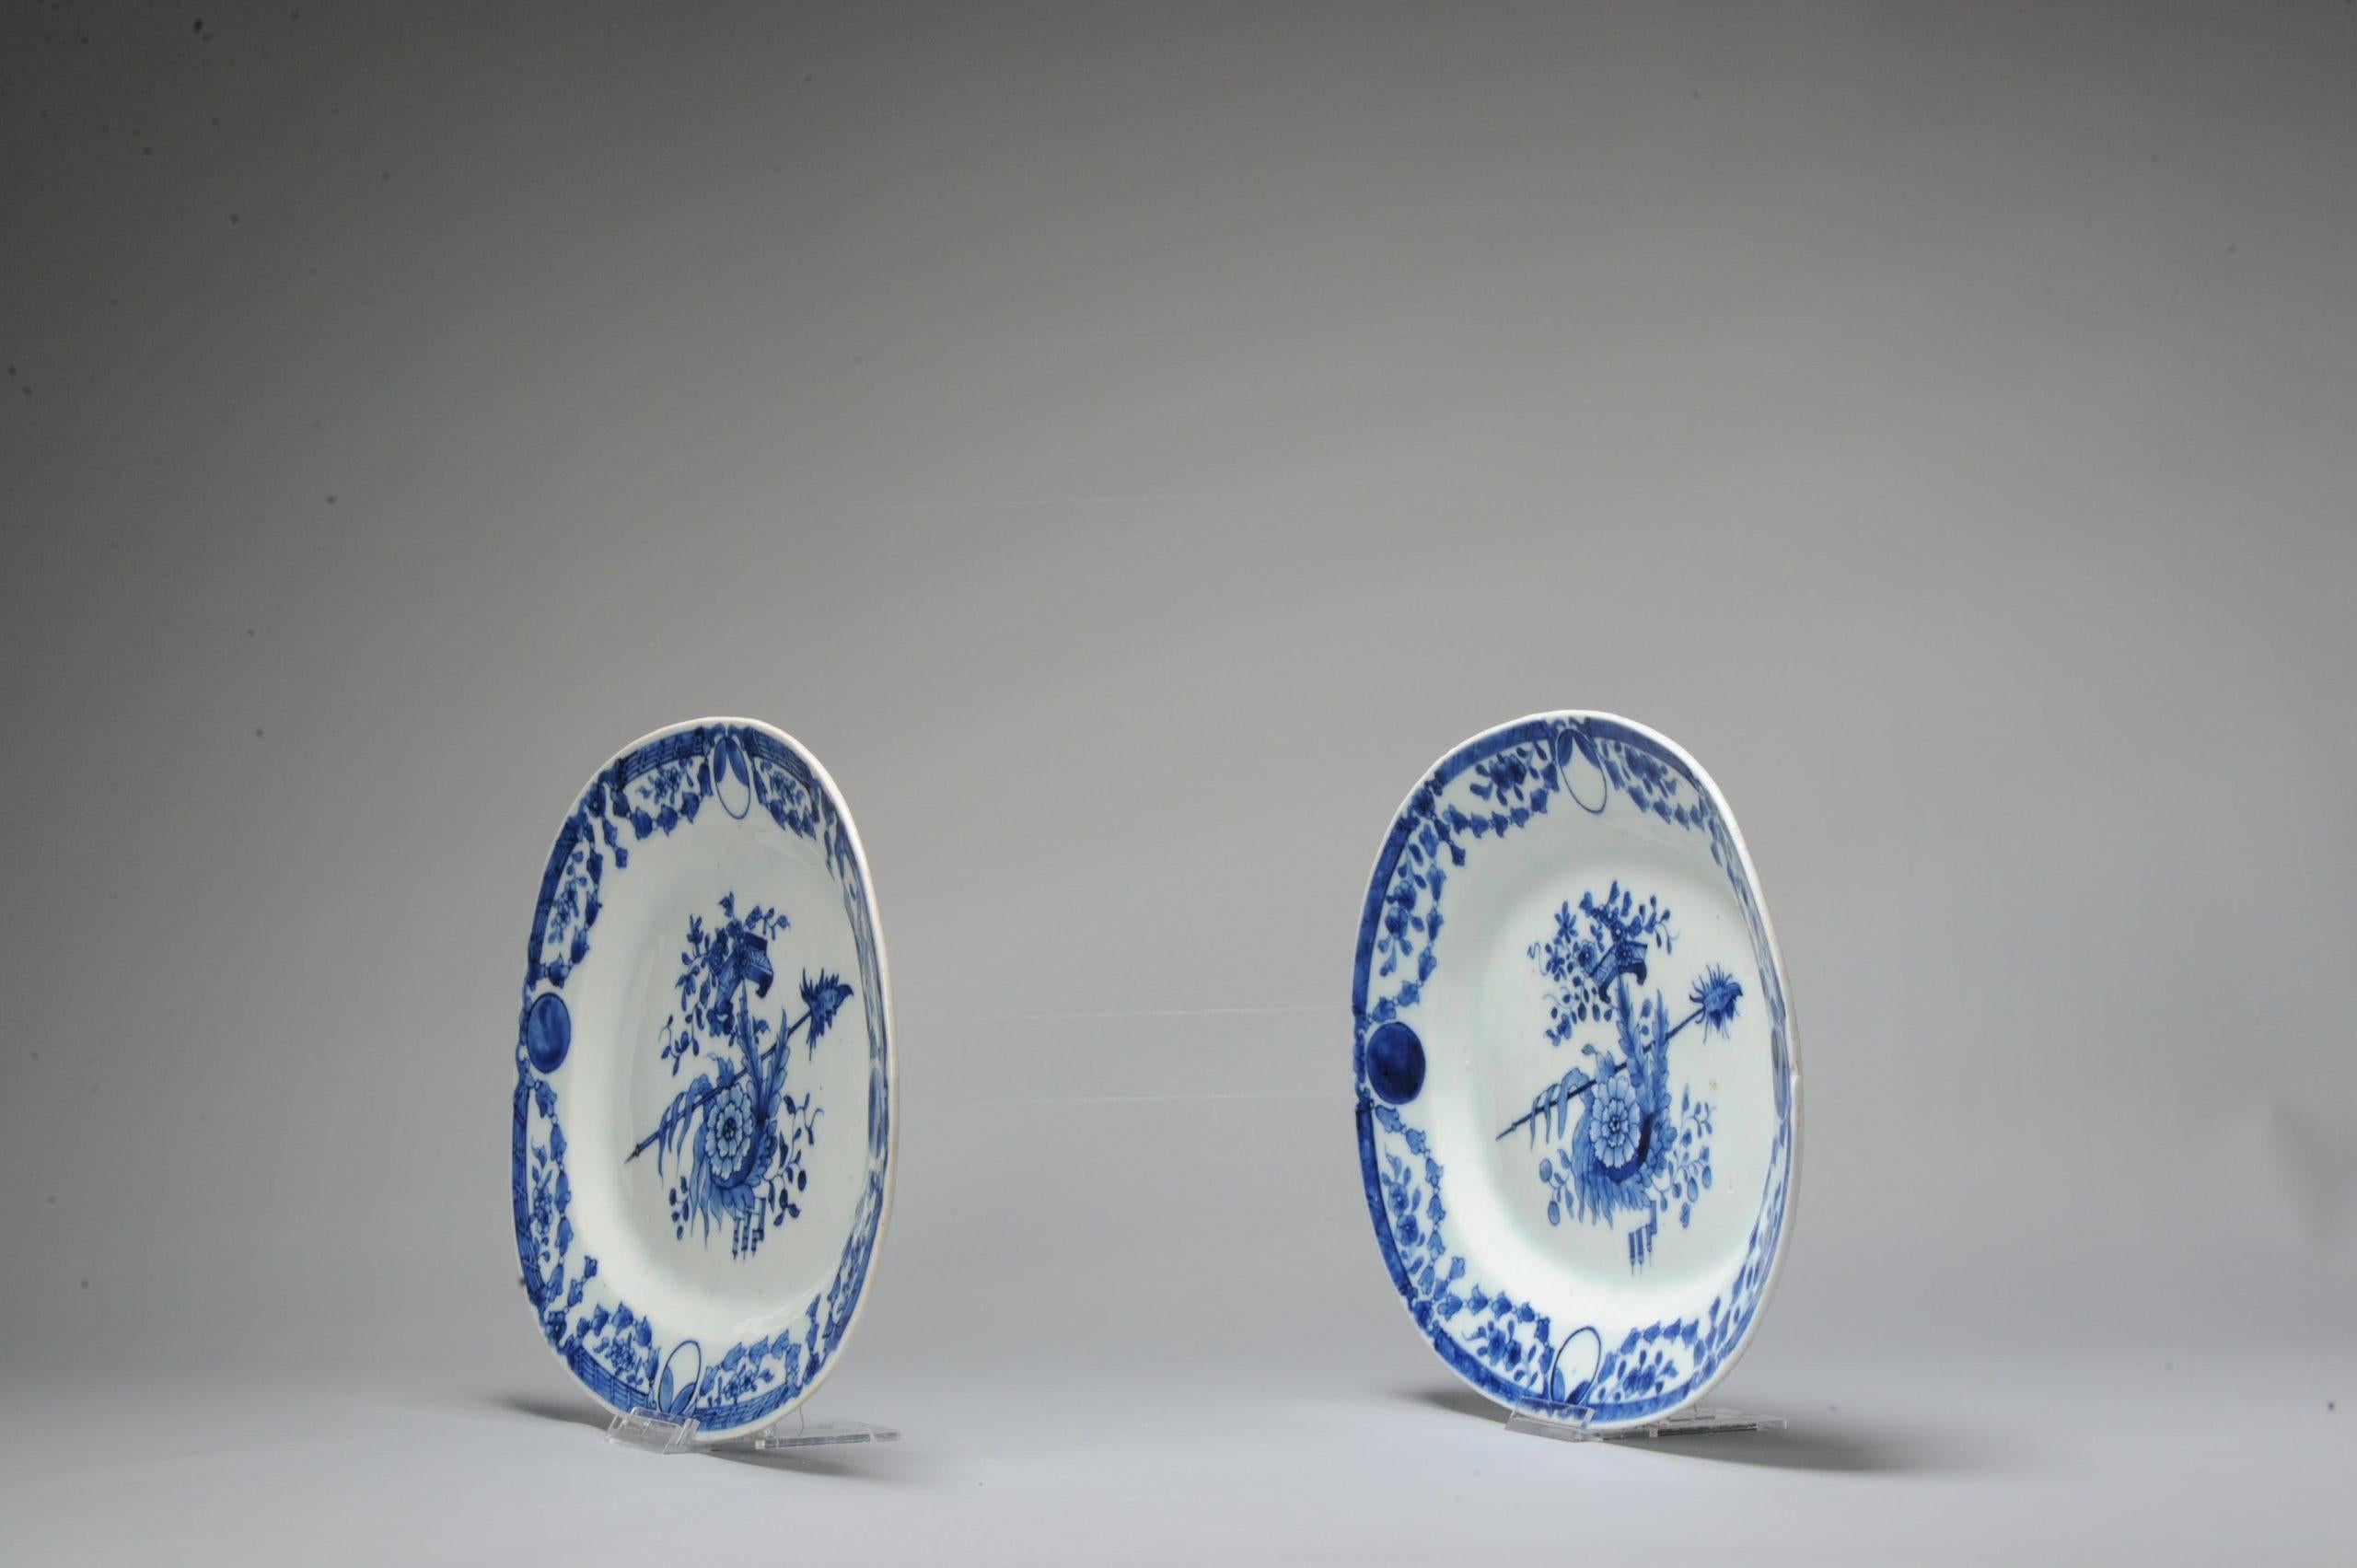 Medium sized dishes.

Decorated in underglaze blue with a beautiful scene of a Scyth and flower guirlande.

Additional information:
Material: Porcelain & Pottery
Color: Blue & White
Region of Origin: China
Period: 18th century Qing (1661 -